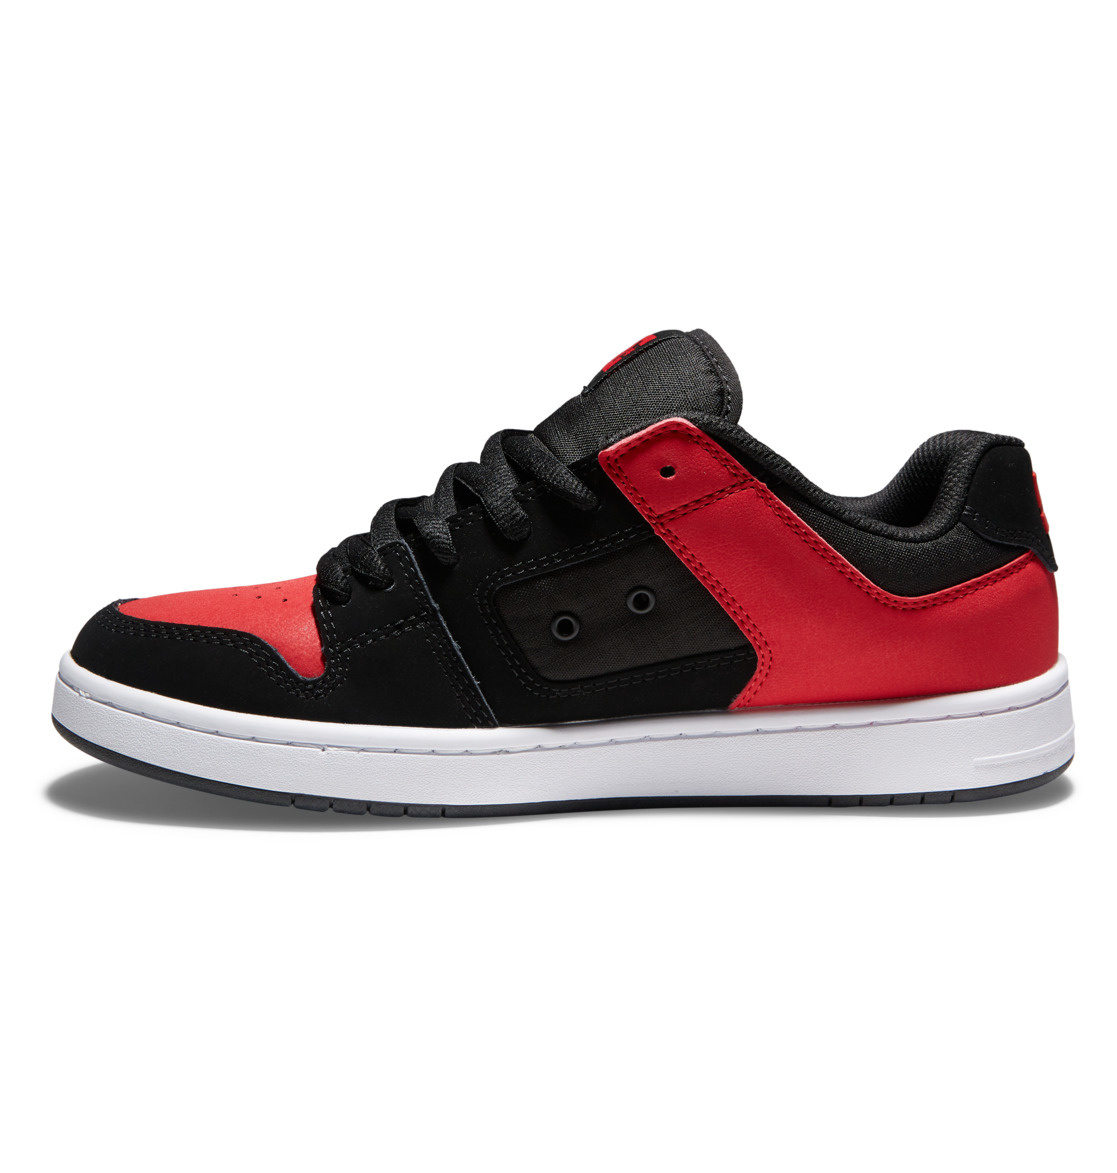 Dc Shoes Manteca 4  - Black/Athletic Red